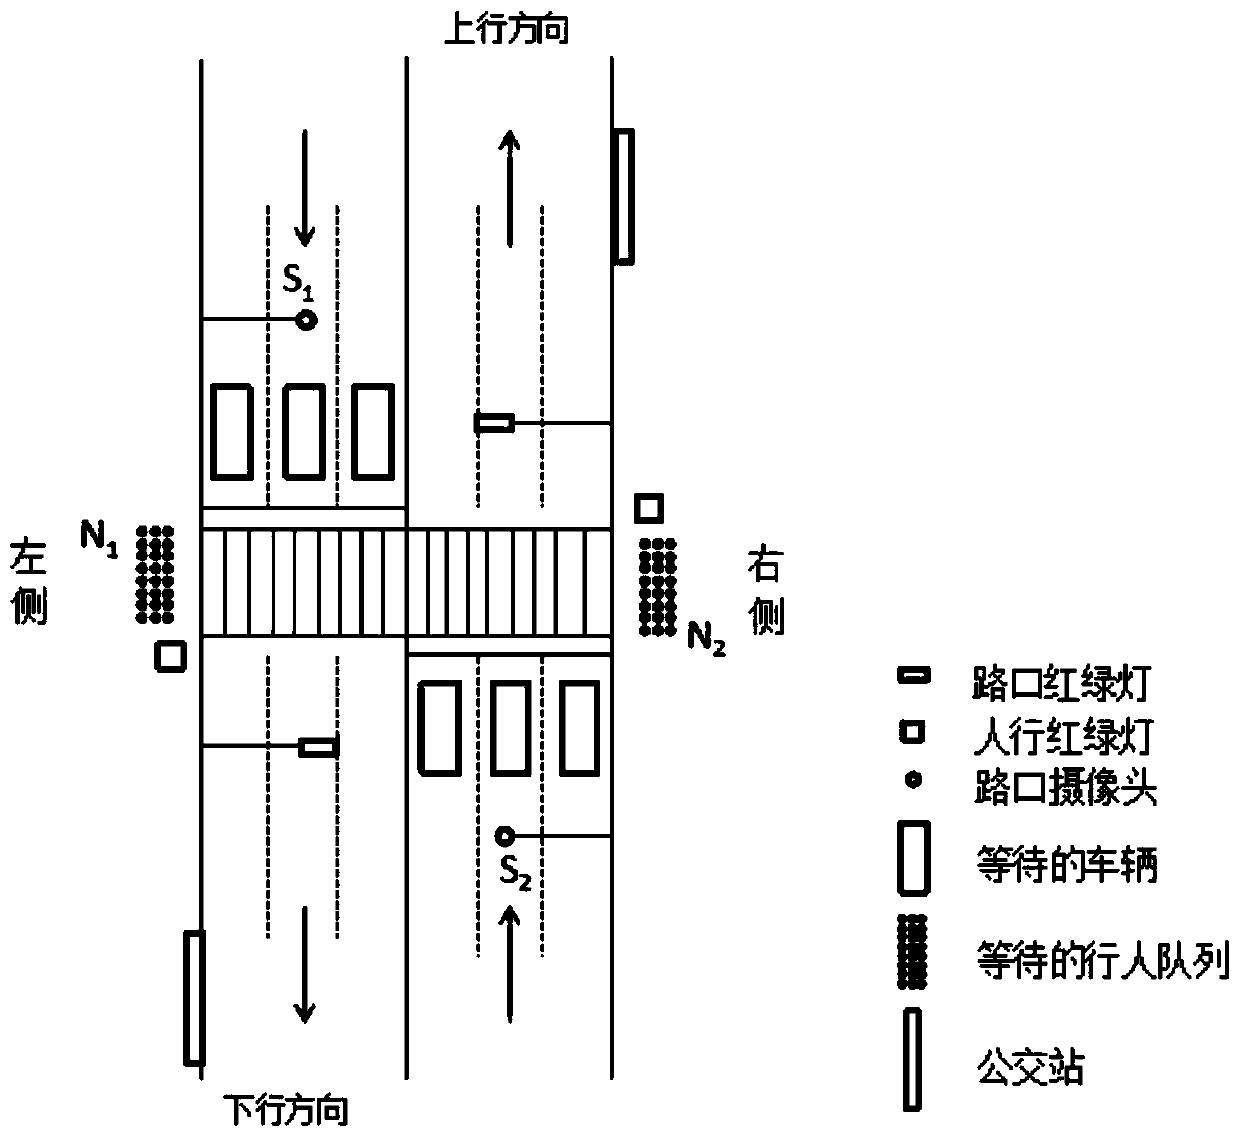 Traffic light time regulation and control method applied to two-way multi-lane pedestrian crossing